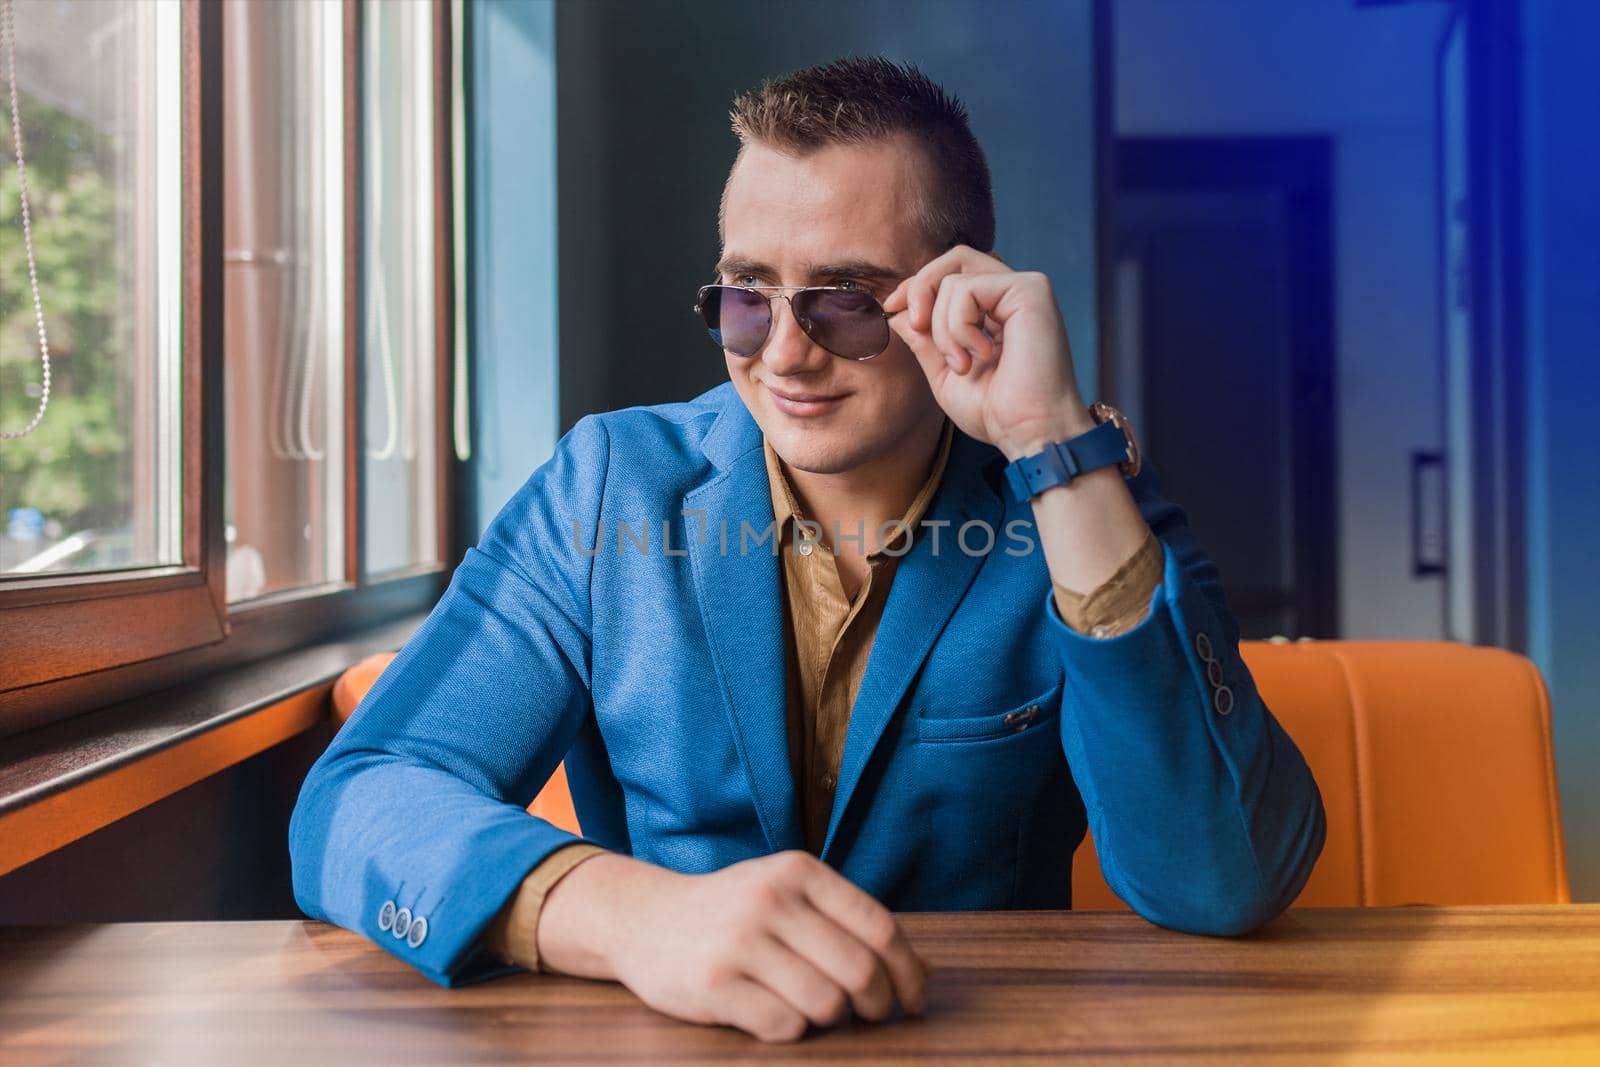 Business young businessman of Caucasian appearance stylish portrait adjusts sunglasses with his hands, looking out the window and sitting at table.